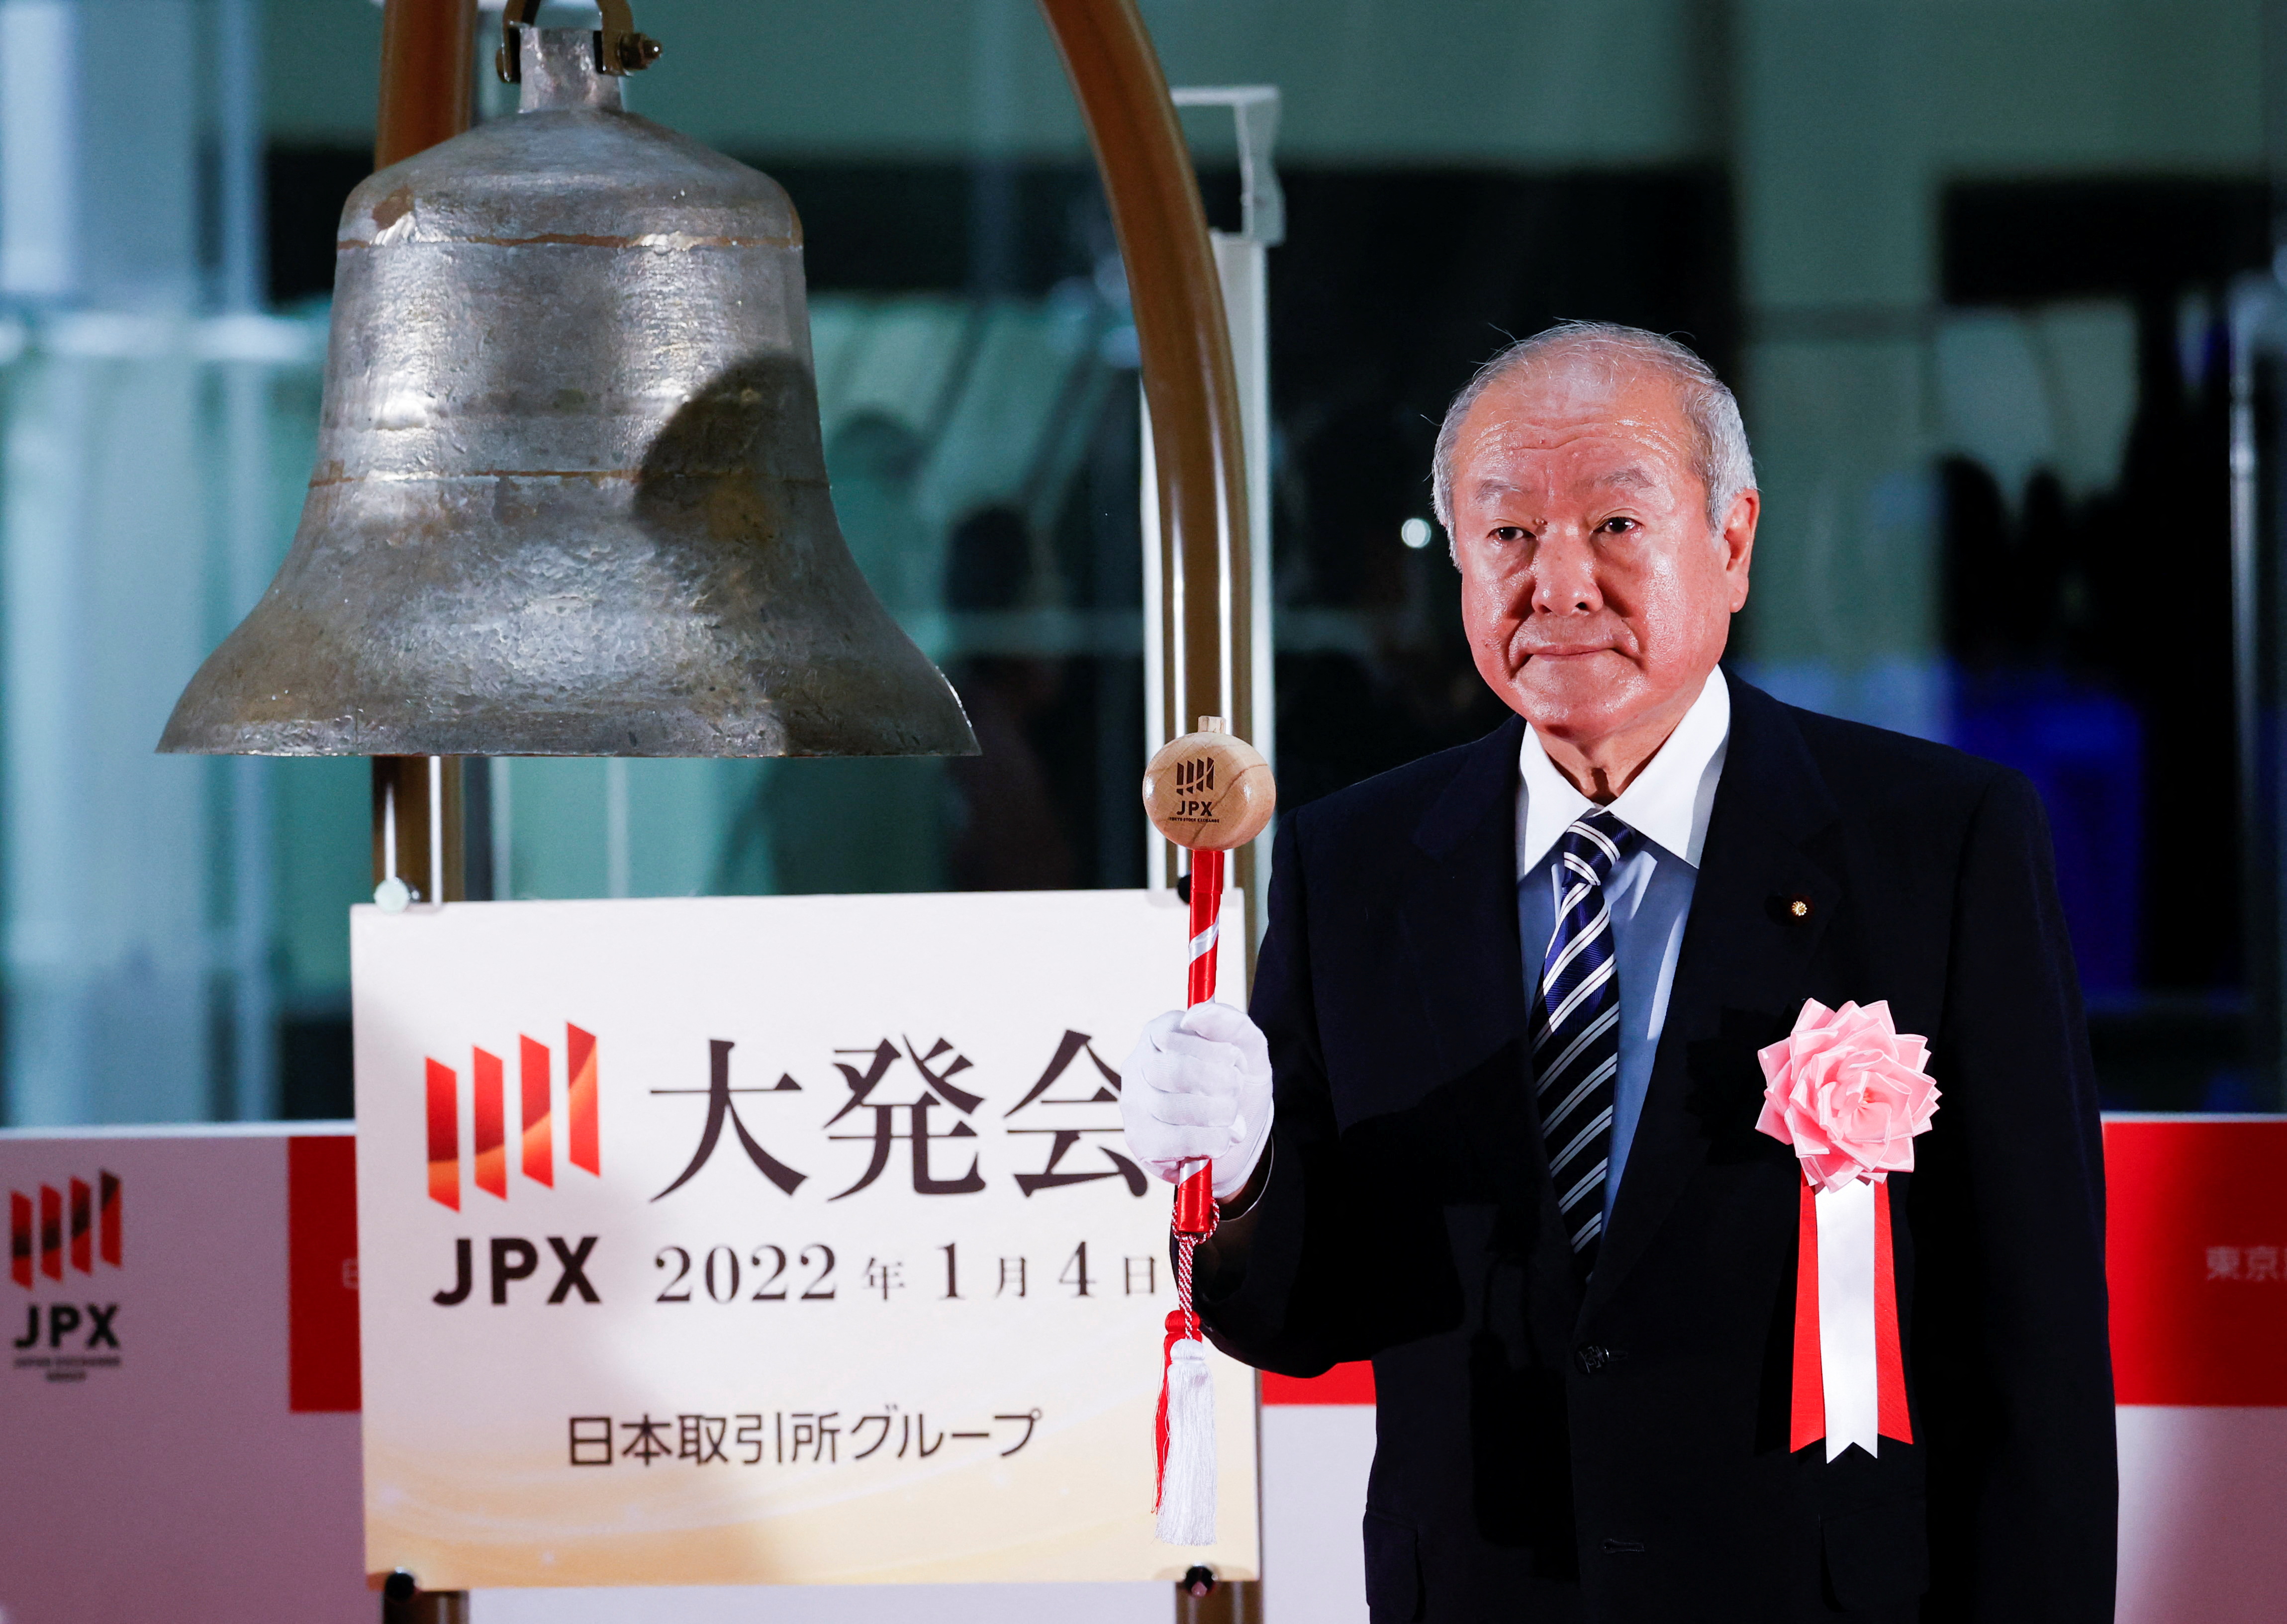 Japan's Finance Minister Shunichi Suzuki prepares to ring a bell during the New Year ceremony marking the open of trading in 2022 at the Tokyo Stock Exchange in Tokyo